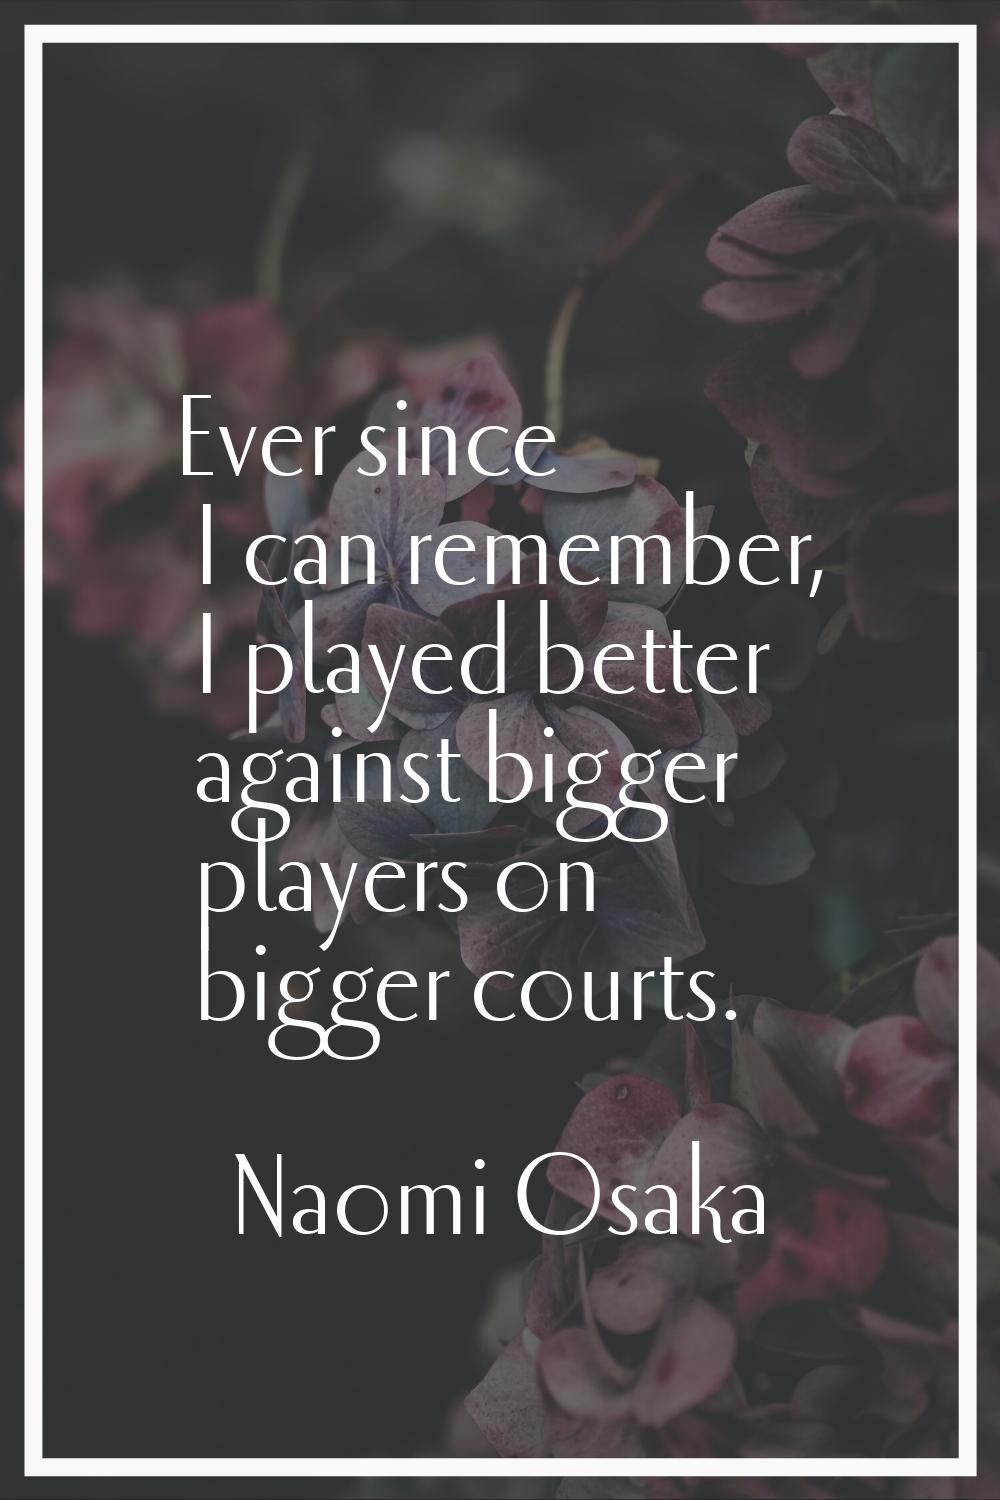 Ever since I can remember, I played better against bigger players on bigger courts.